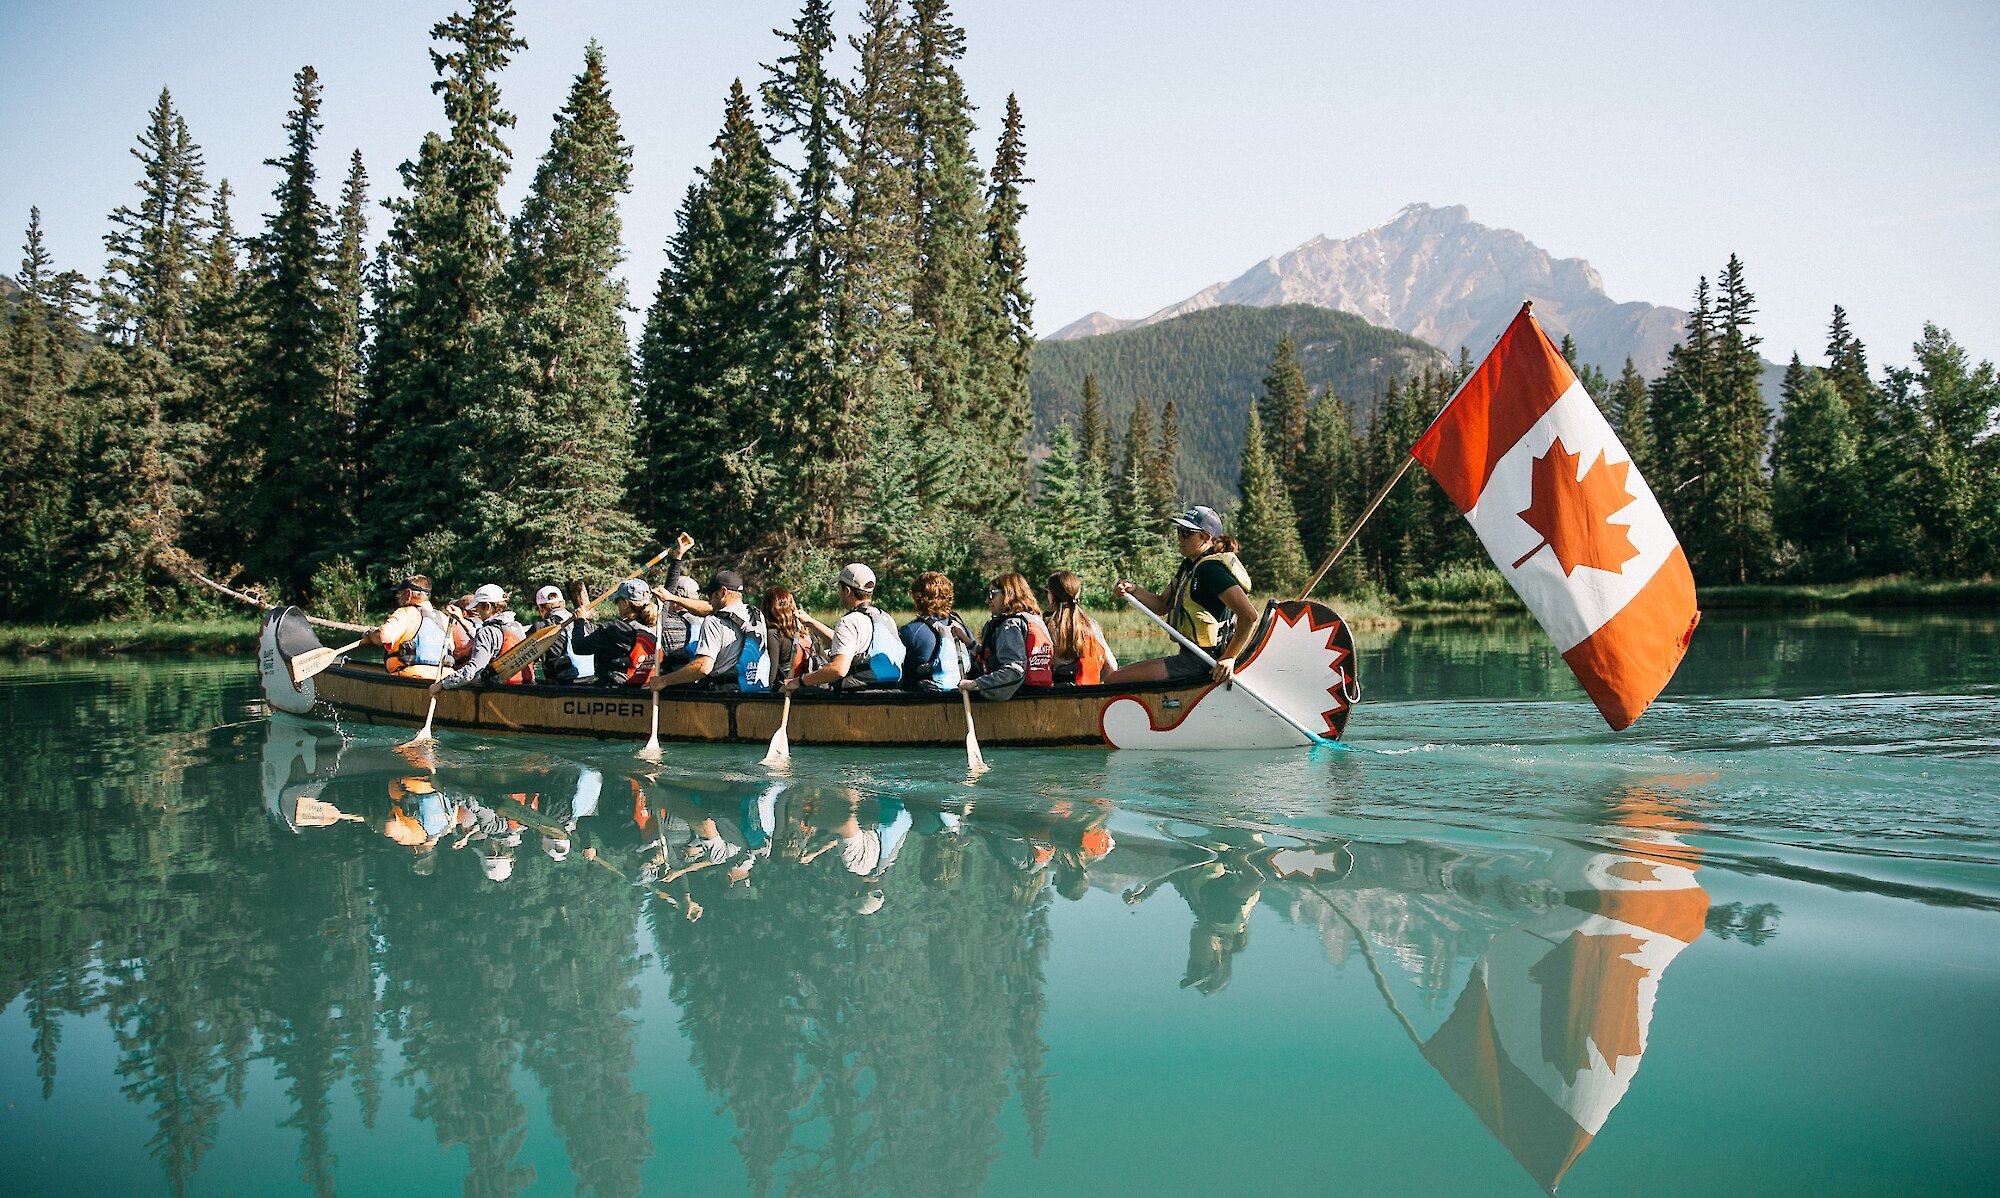 A Big Canoe Tour paddling on the turquoise waters of the Bow River in Banff